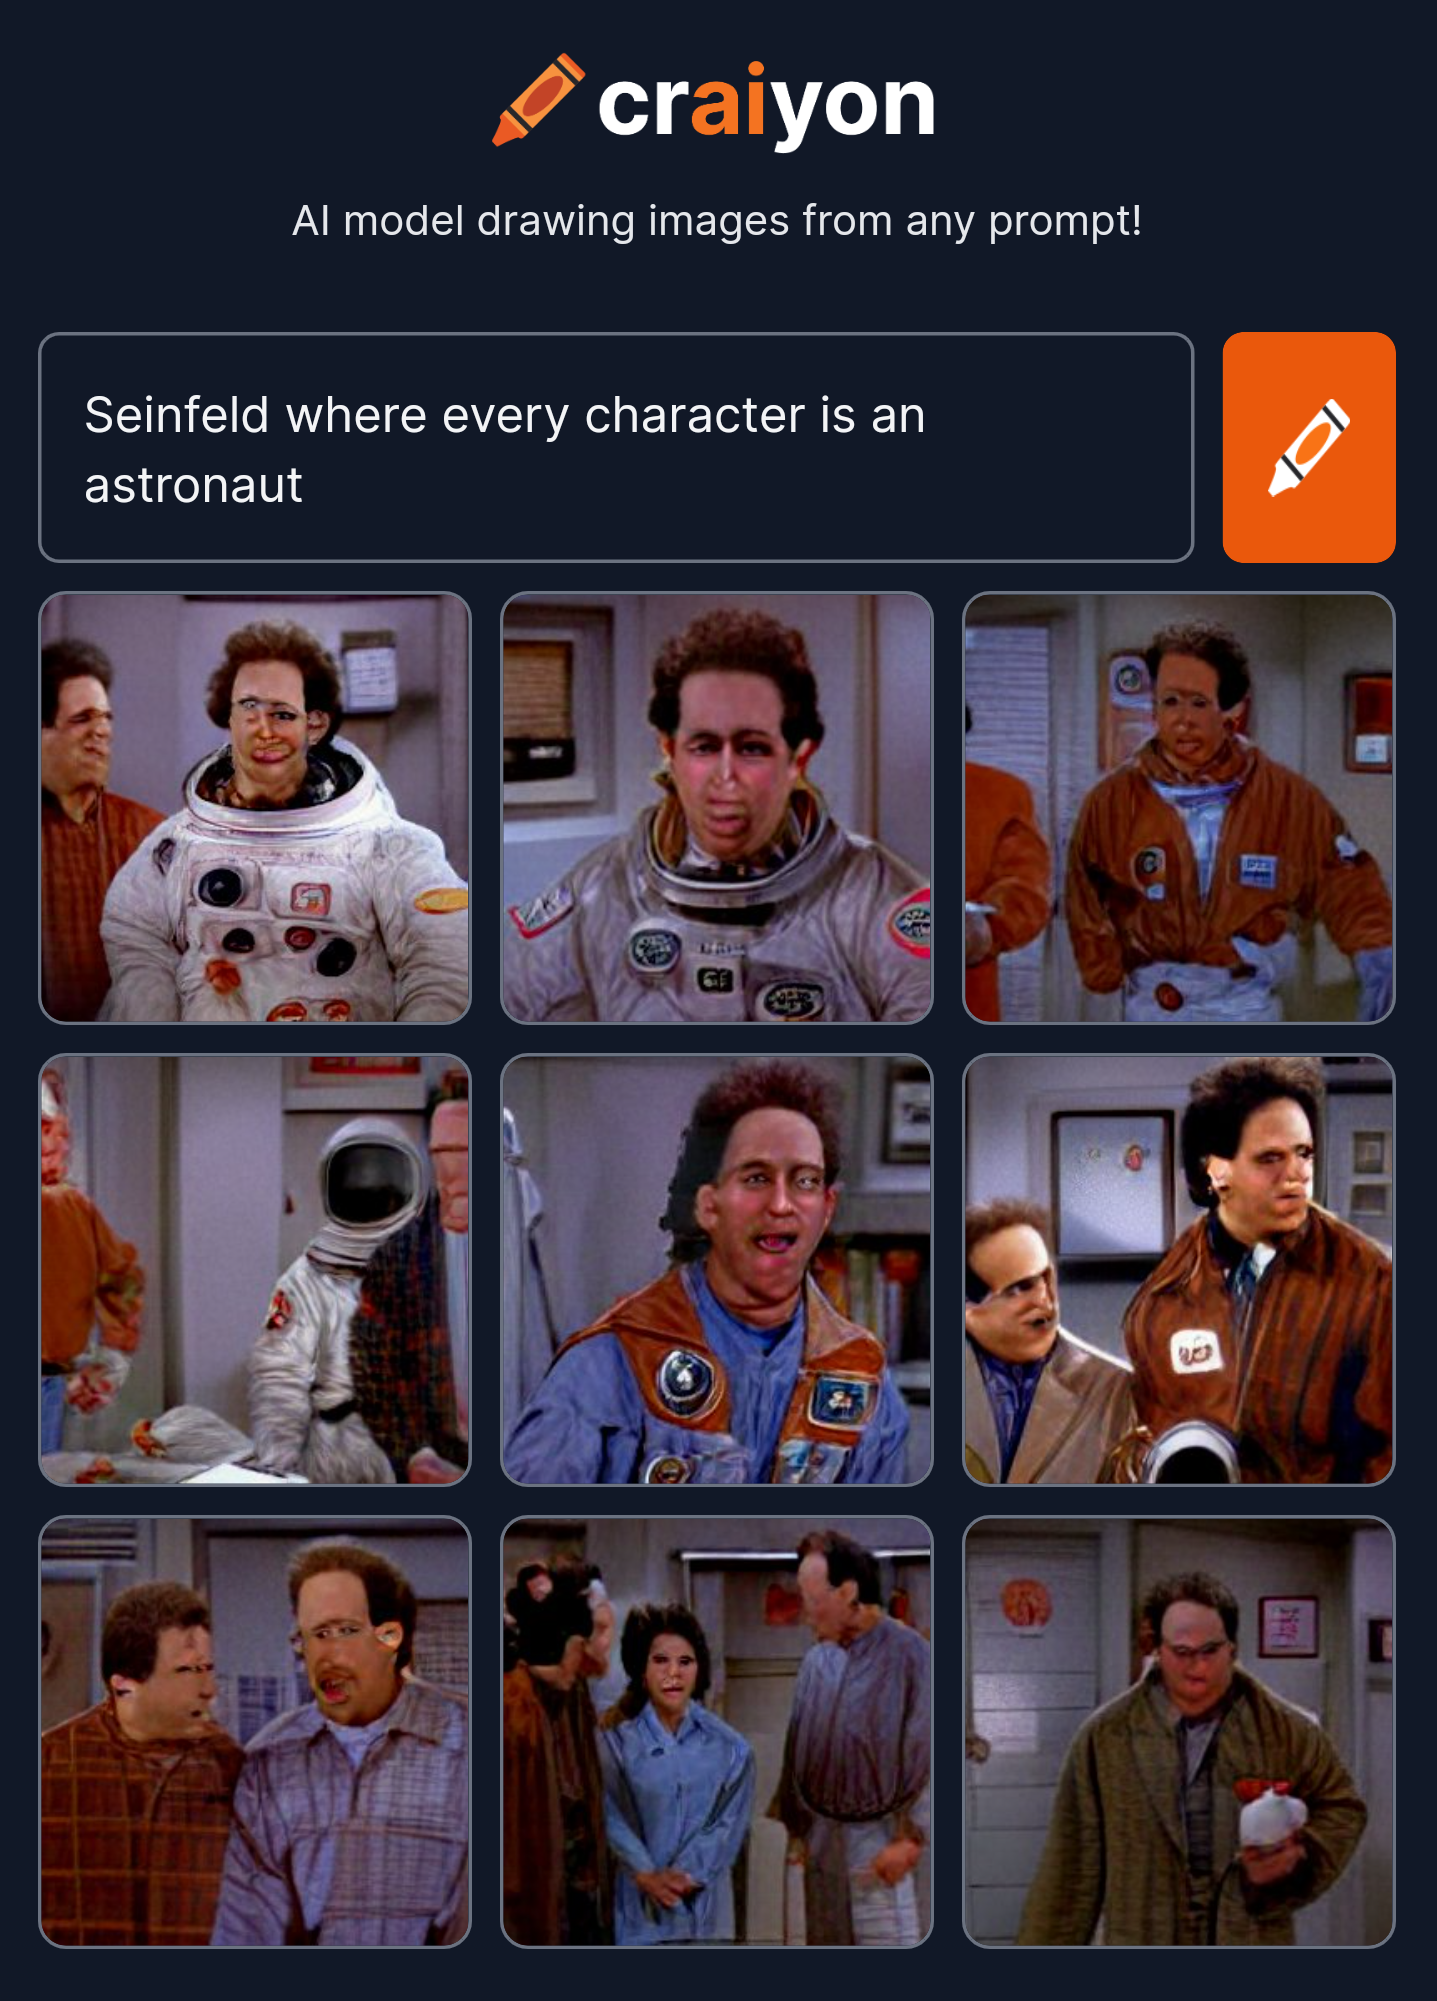 craiyon_100219_Seinfeld_where_every_character_is_an_astronaut.jpg.png